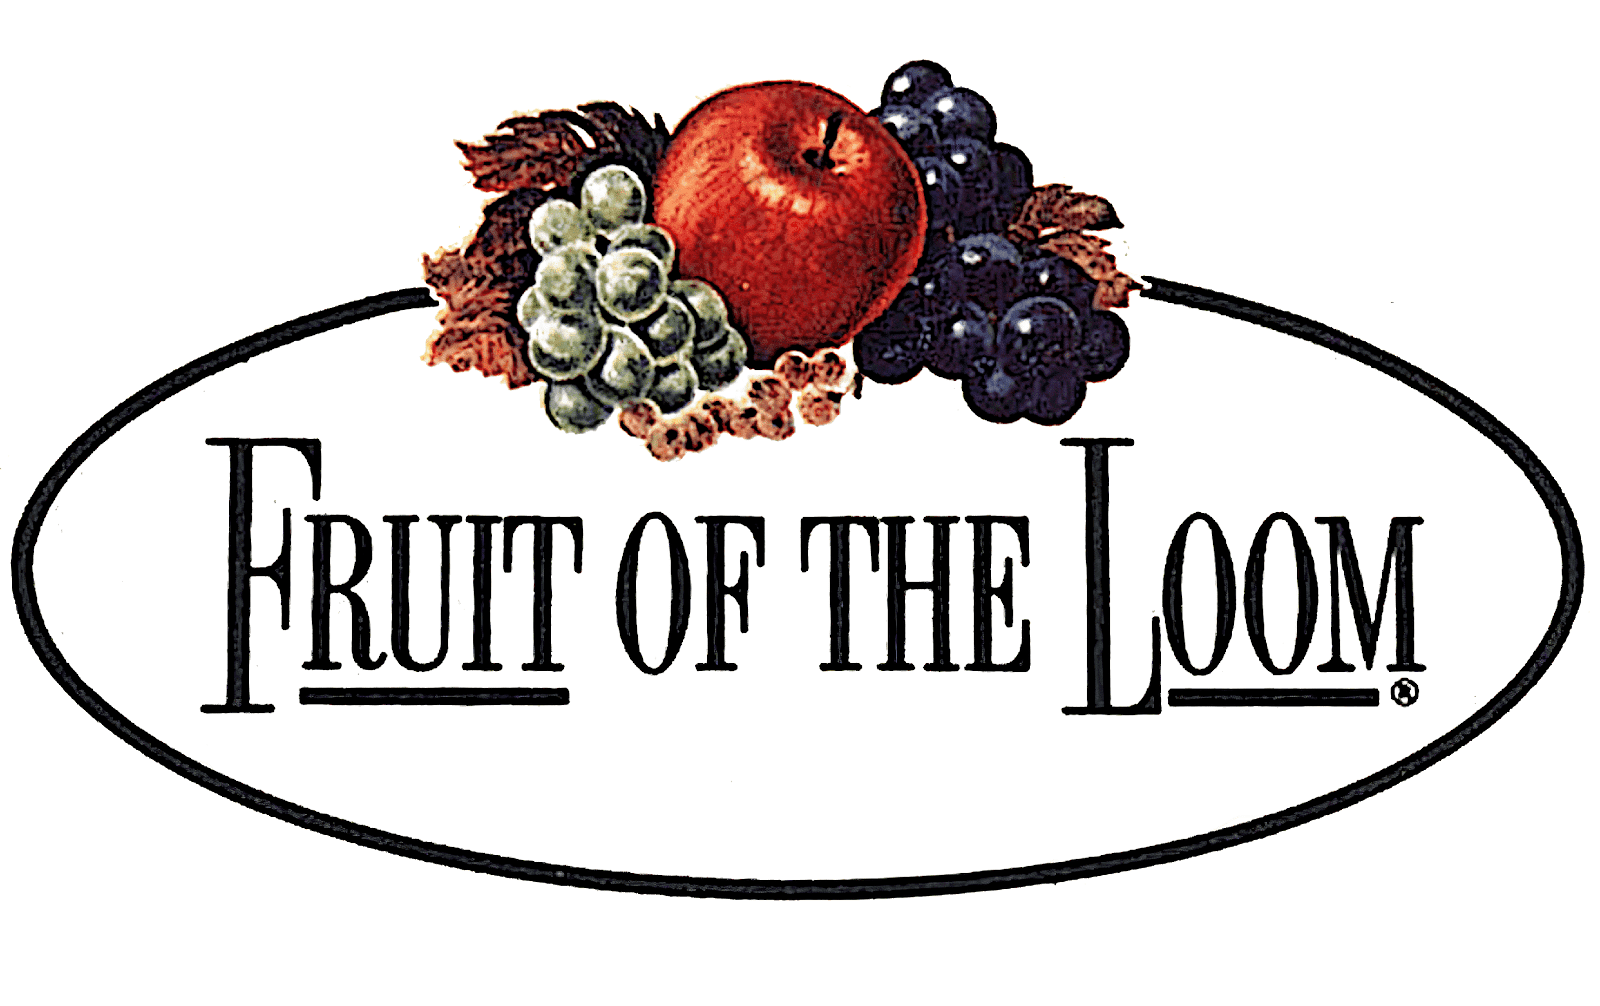 The new premium Iconic Collection by Fruit of the Loom - Images magazine,  fruit of the loom 